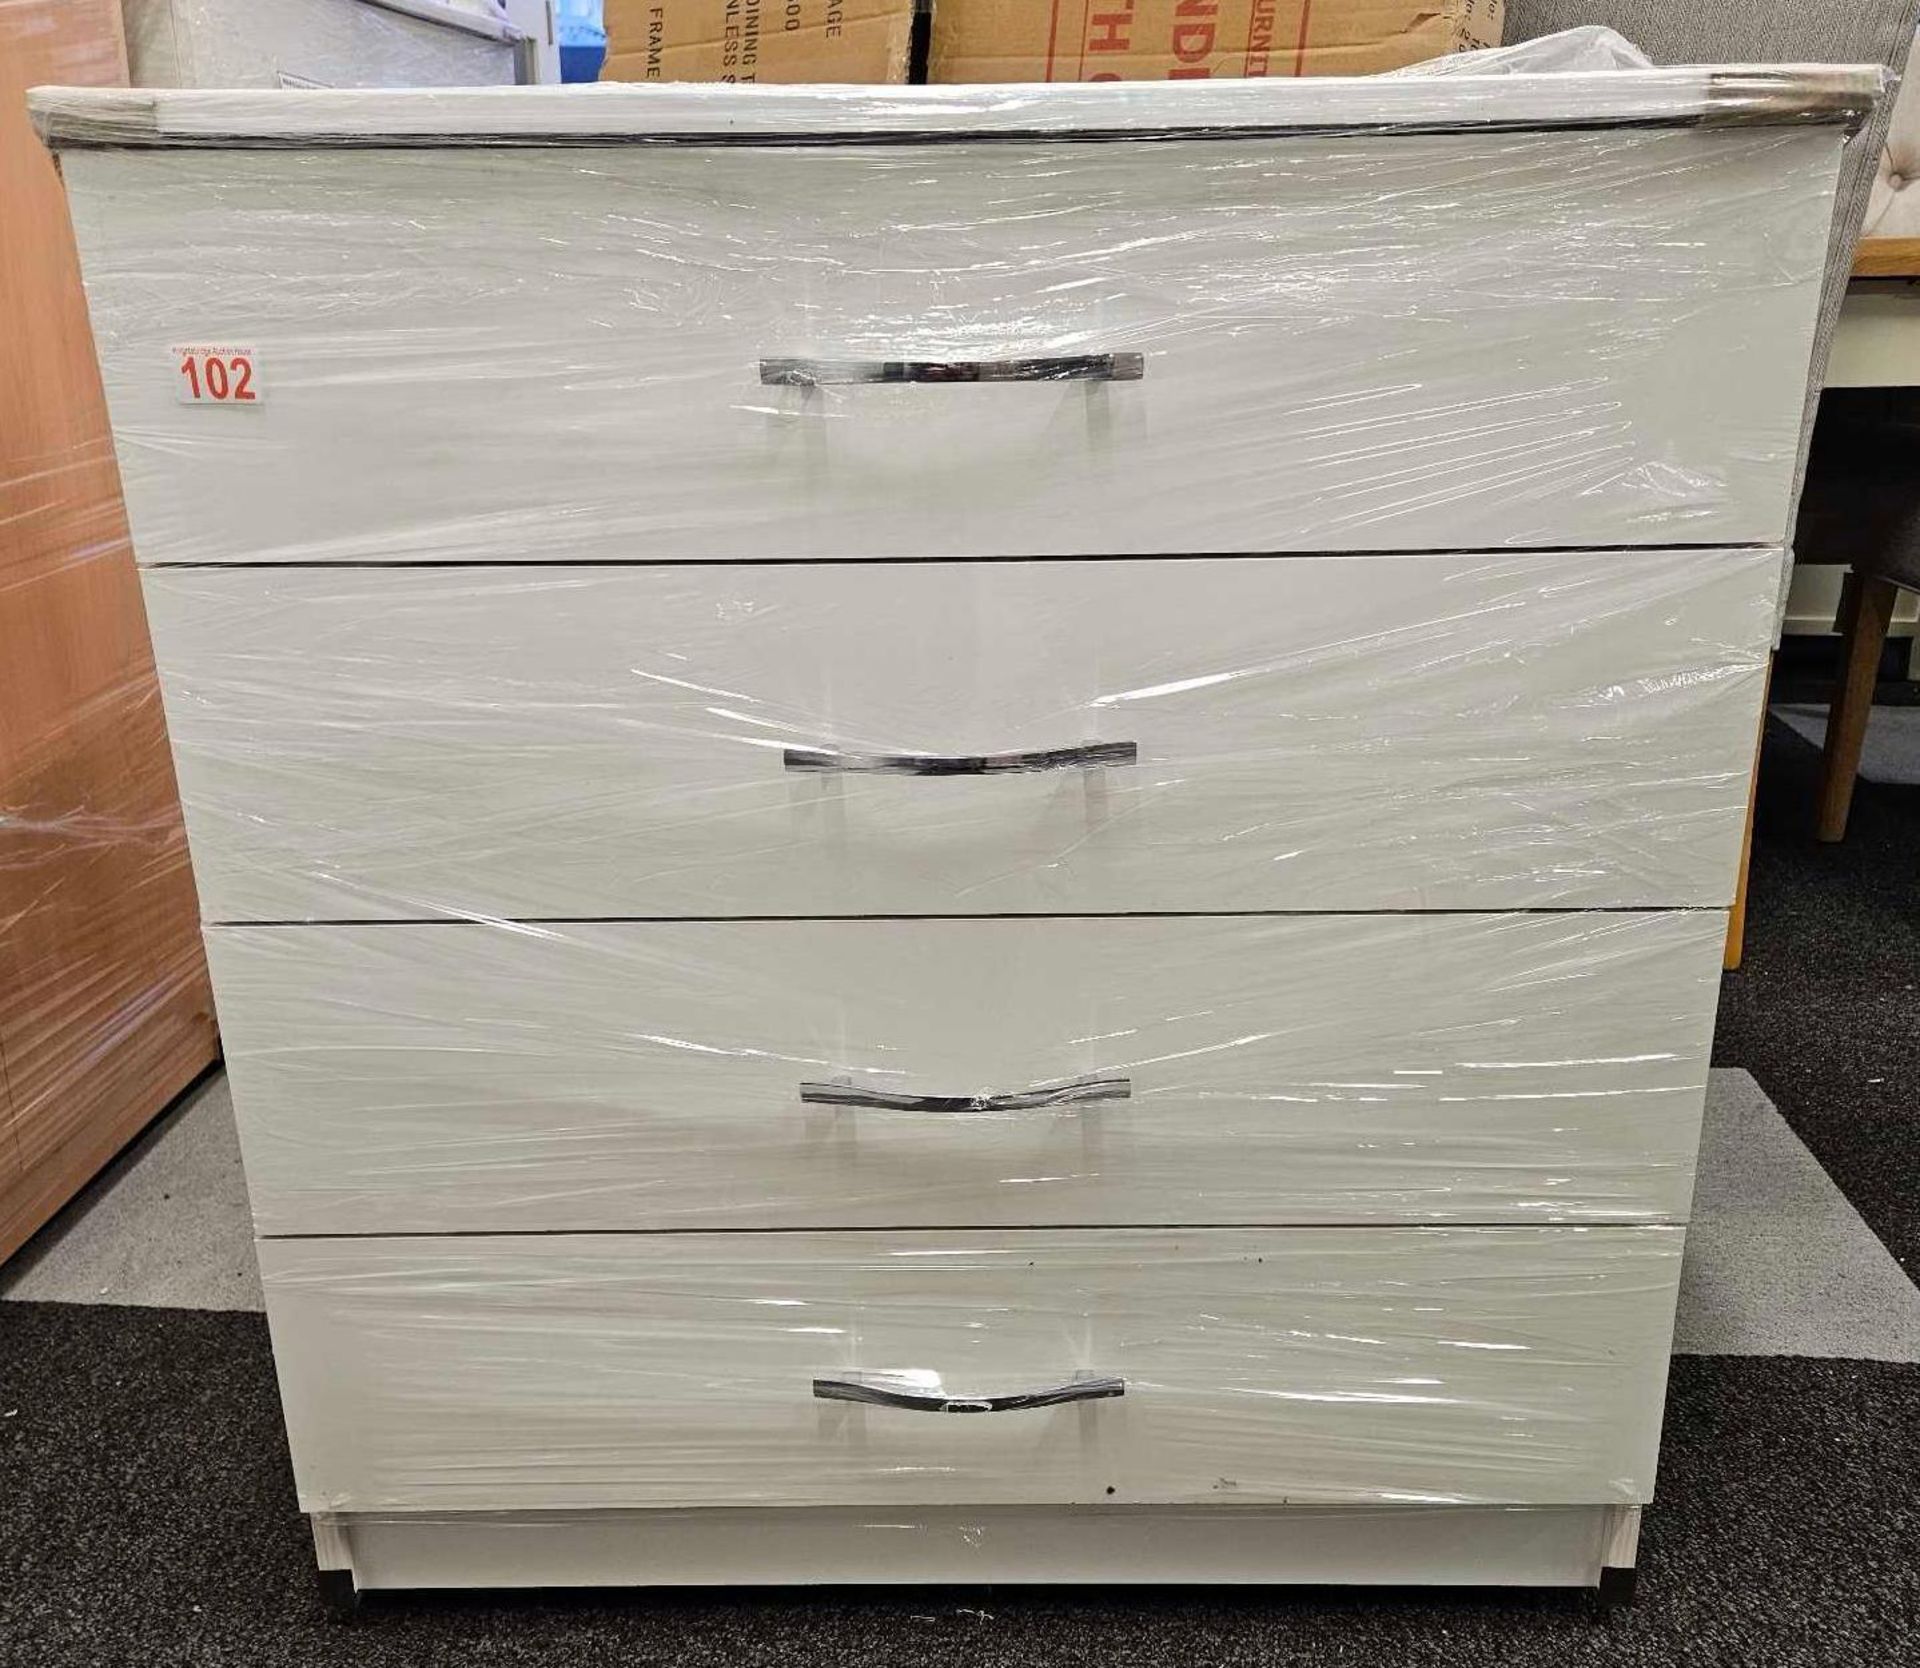 *EX DISPLAY* 4 drawer chest in white.